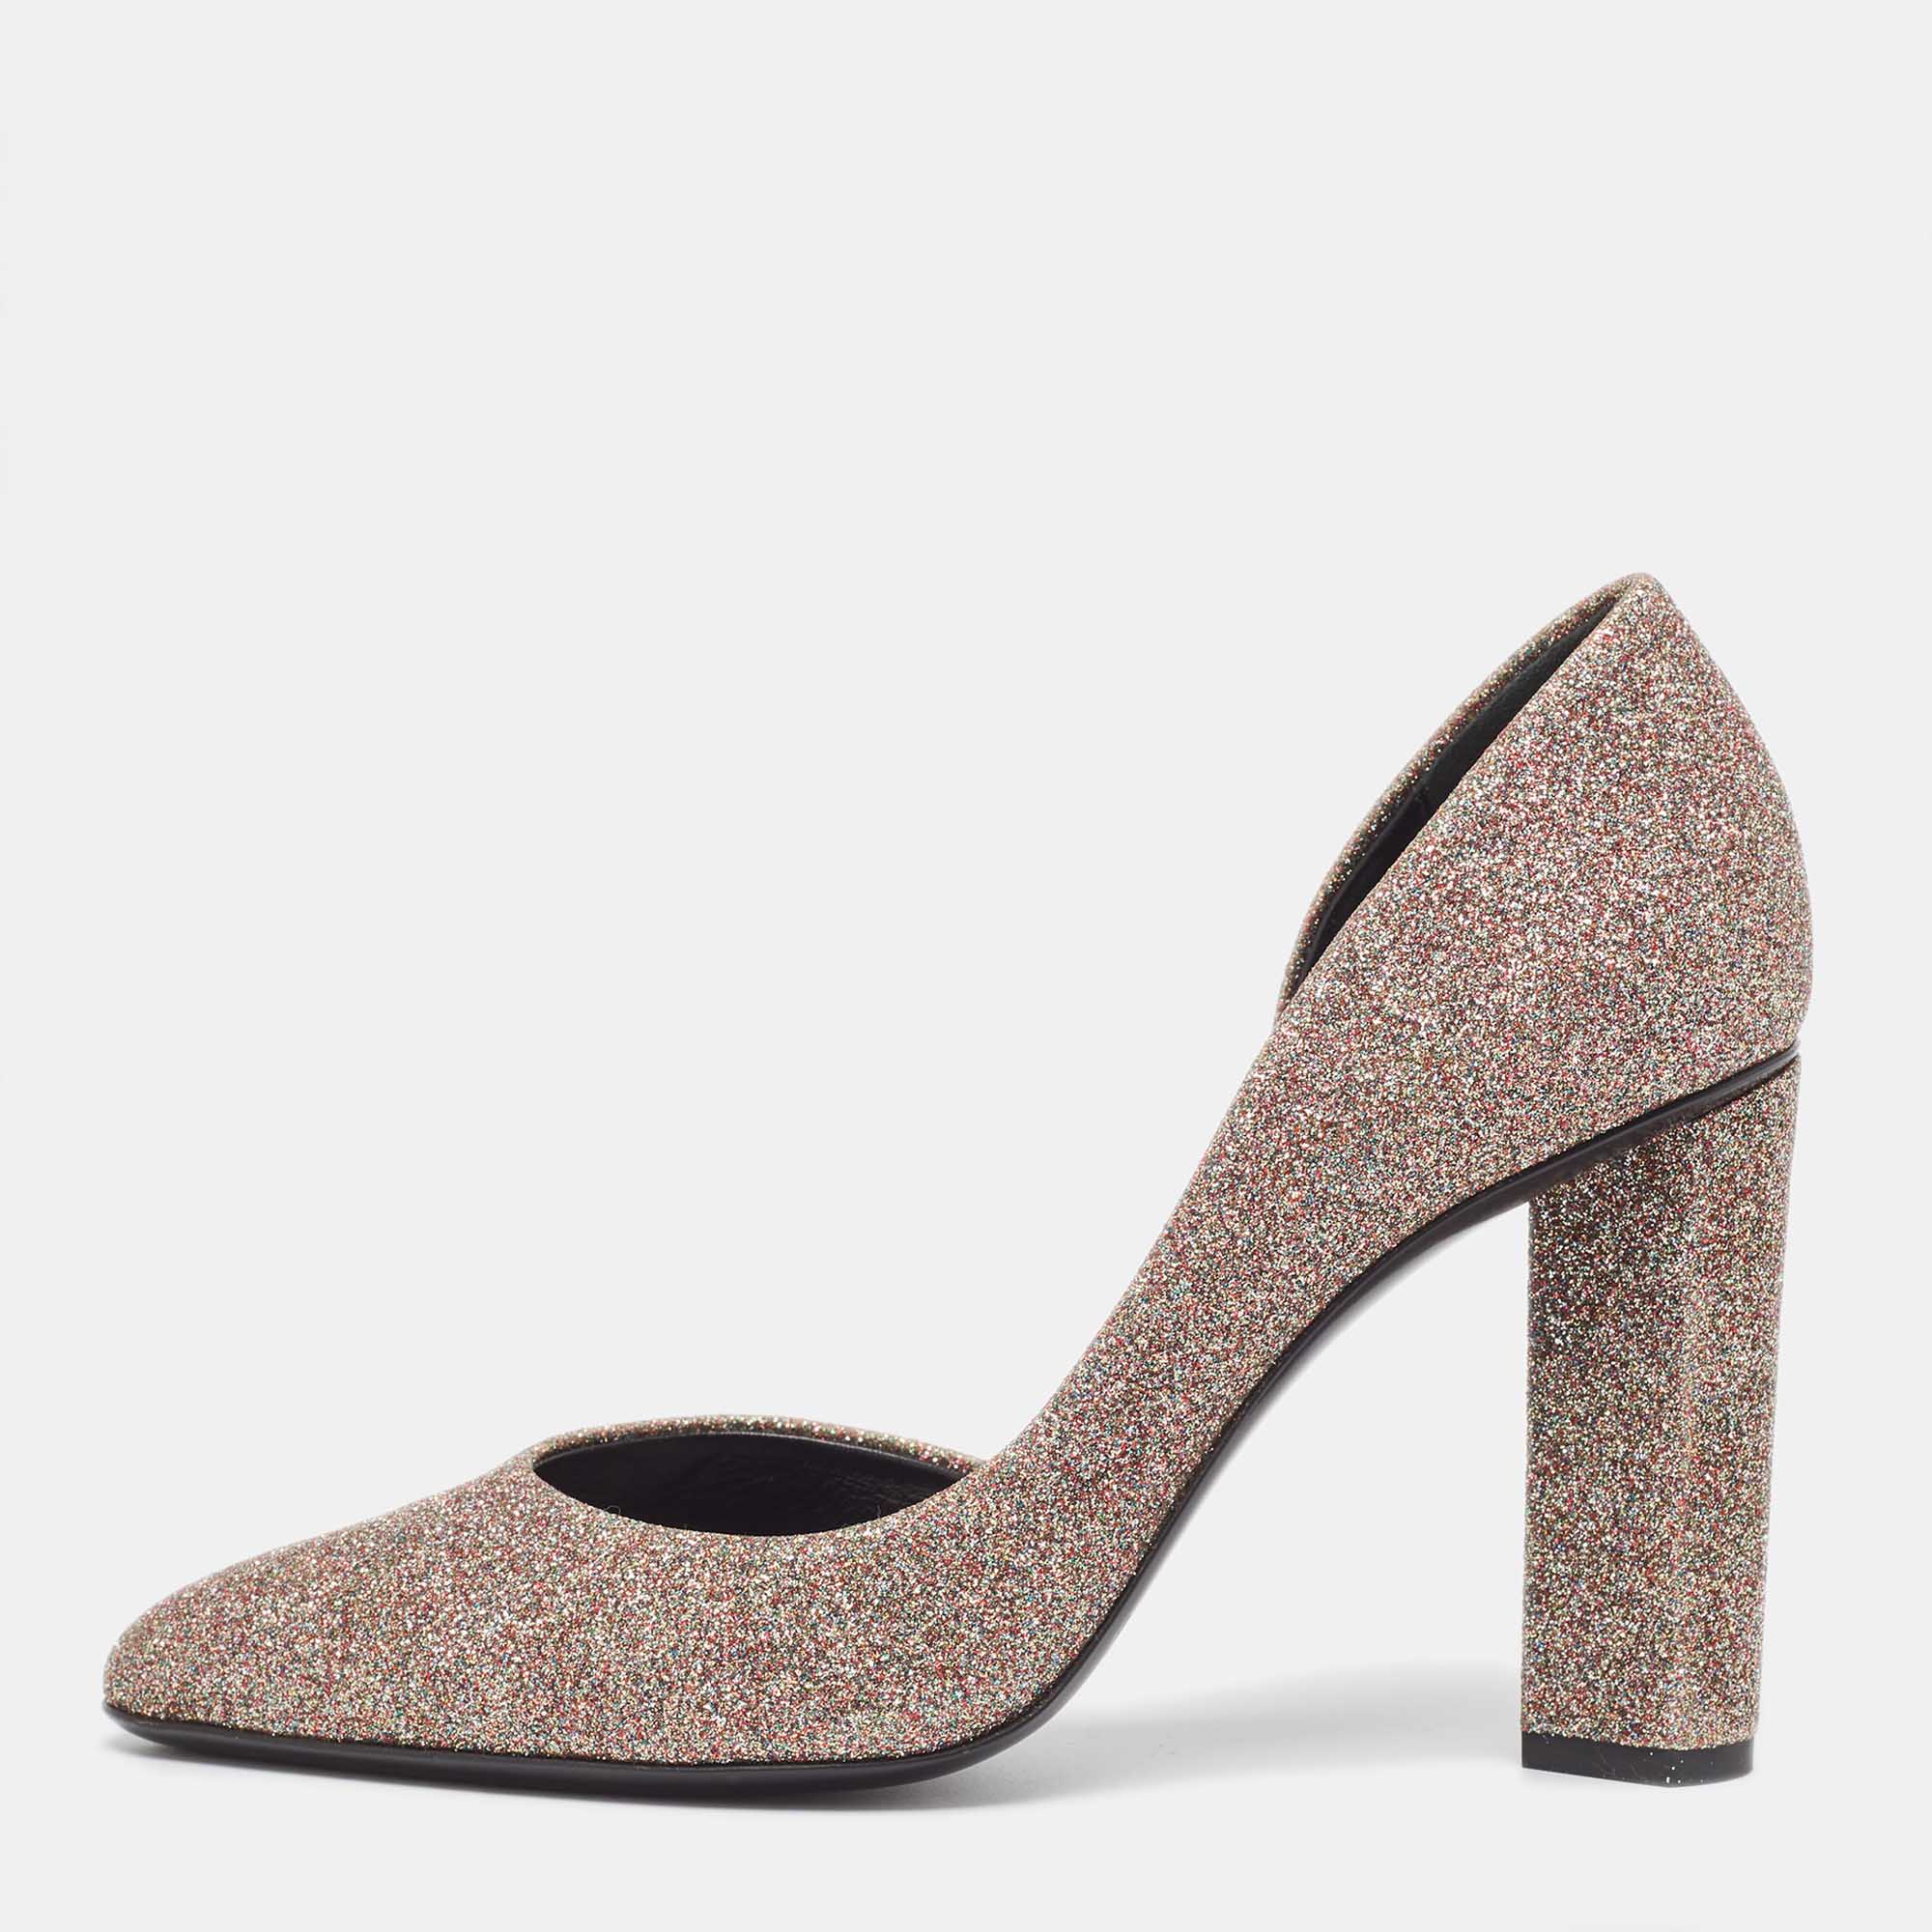 Pierre hardy multicolor glitter fabric d'orsay pumps size 37